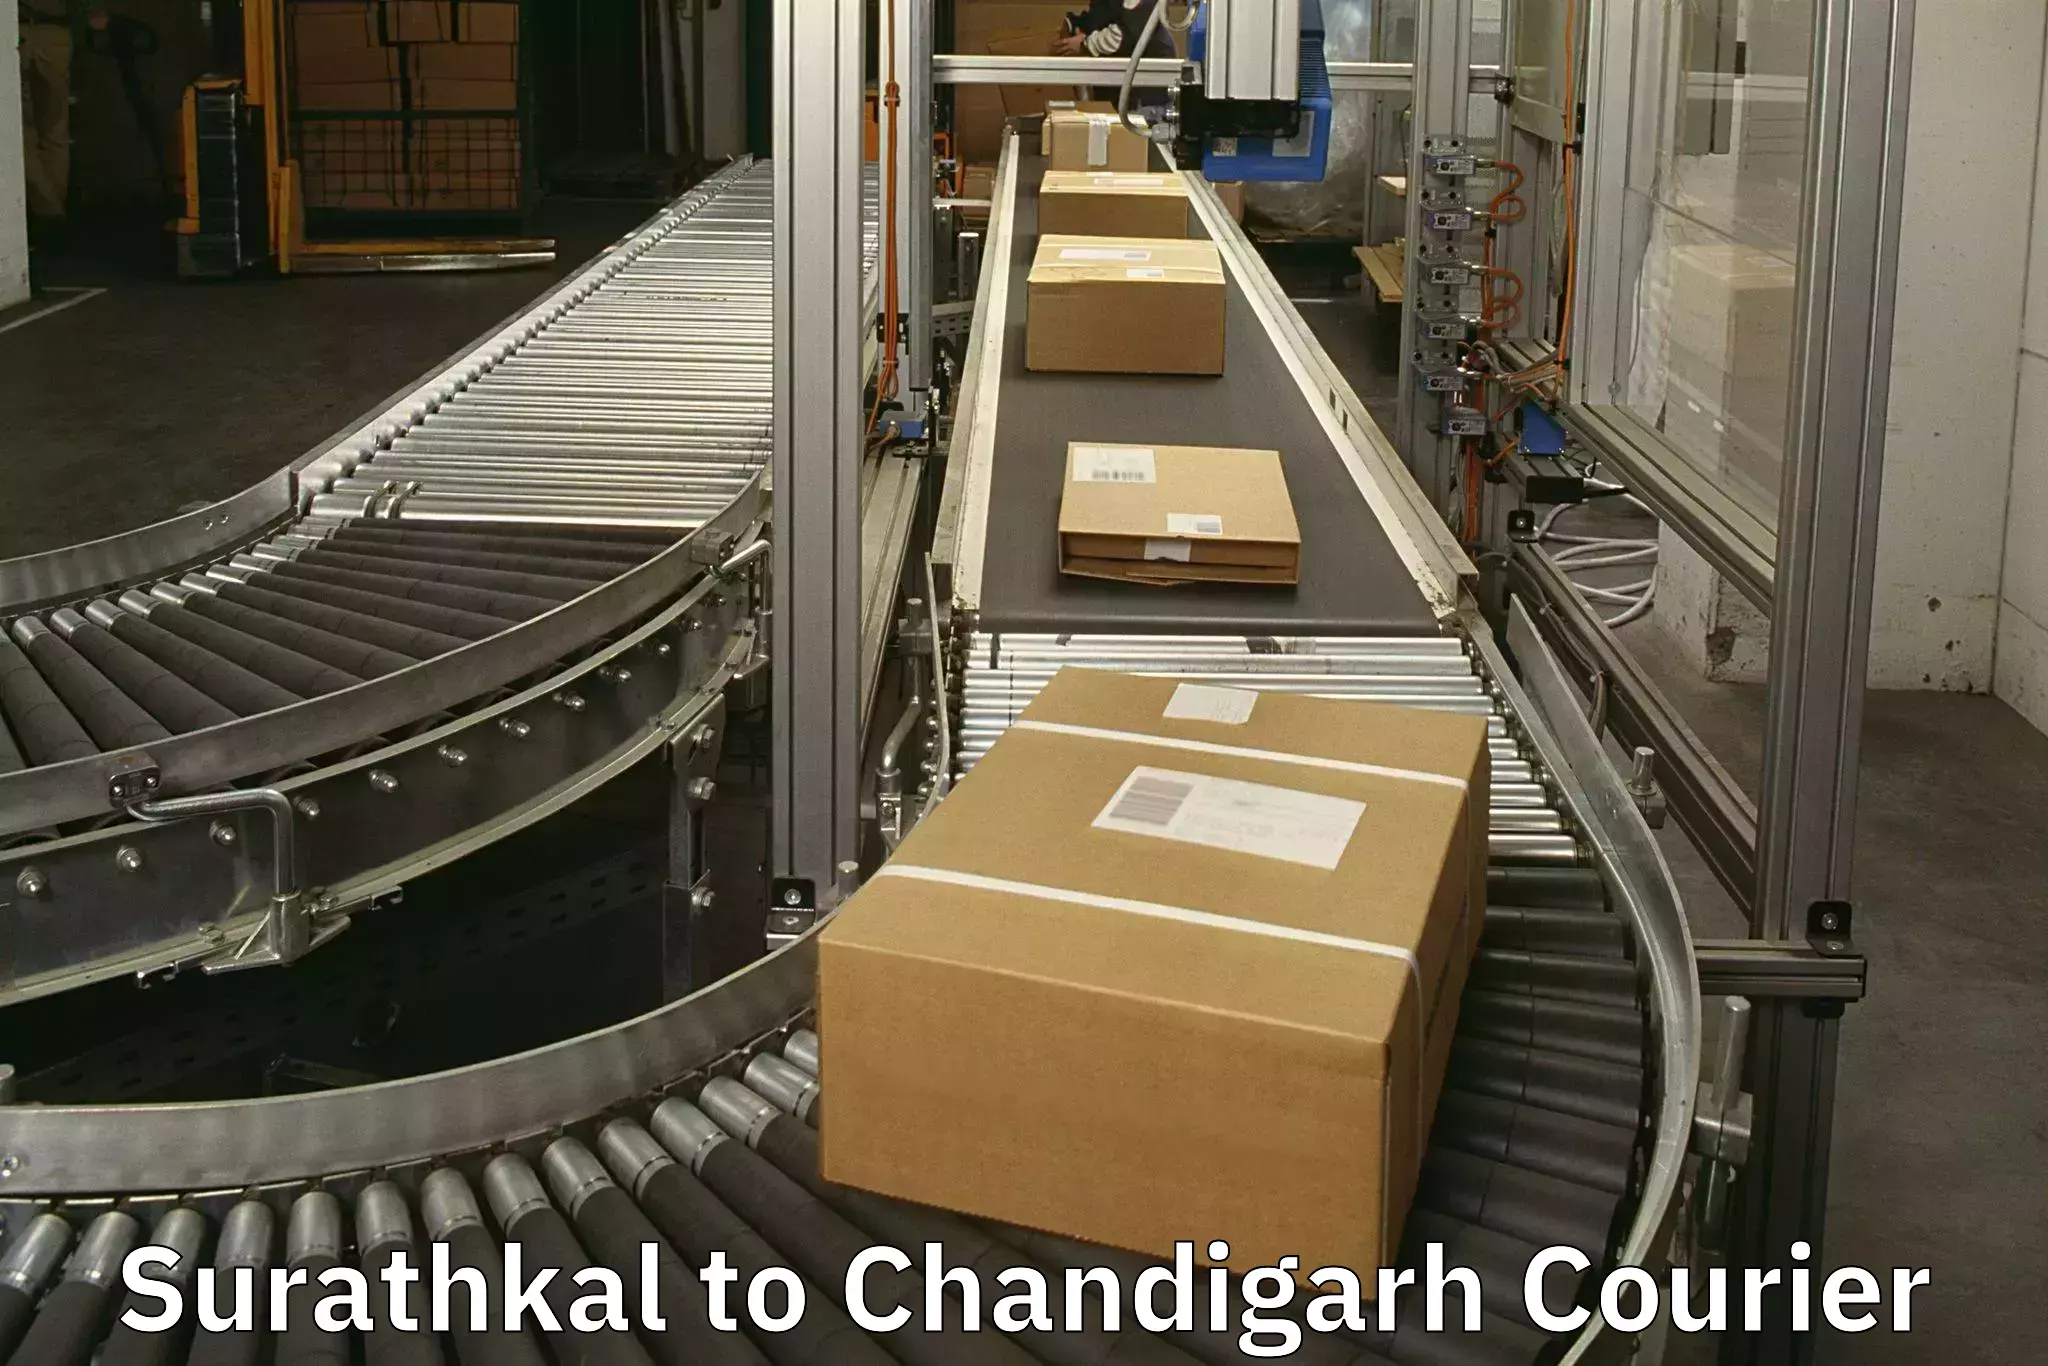 Baggage transport quote Surathkal to Chandigarh